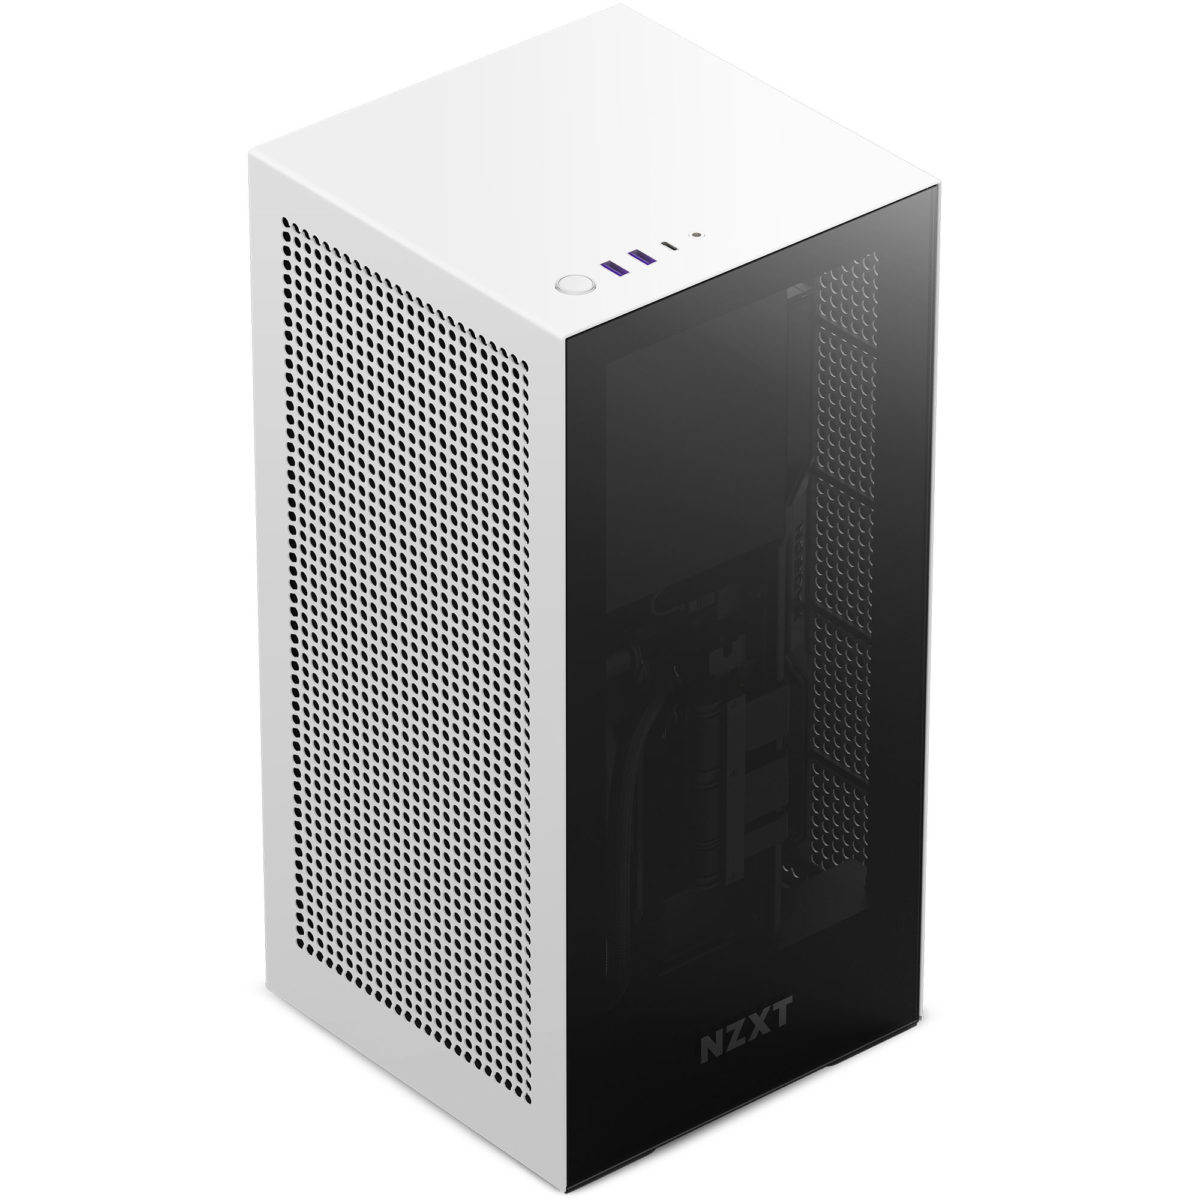 Nzxt Releases Updated H1 V2 Itx Chassis